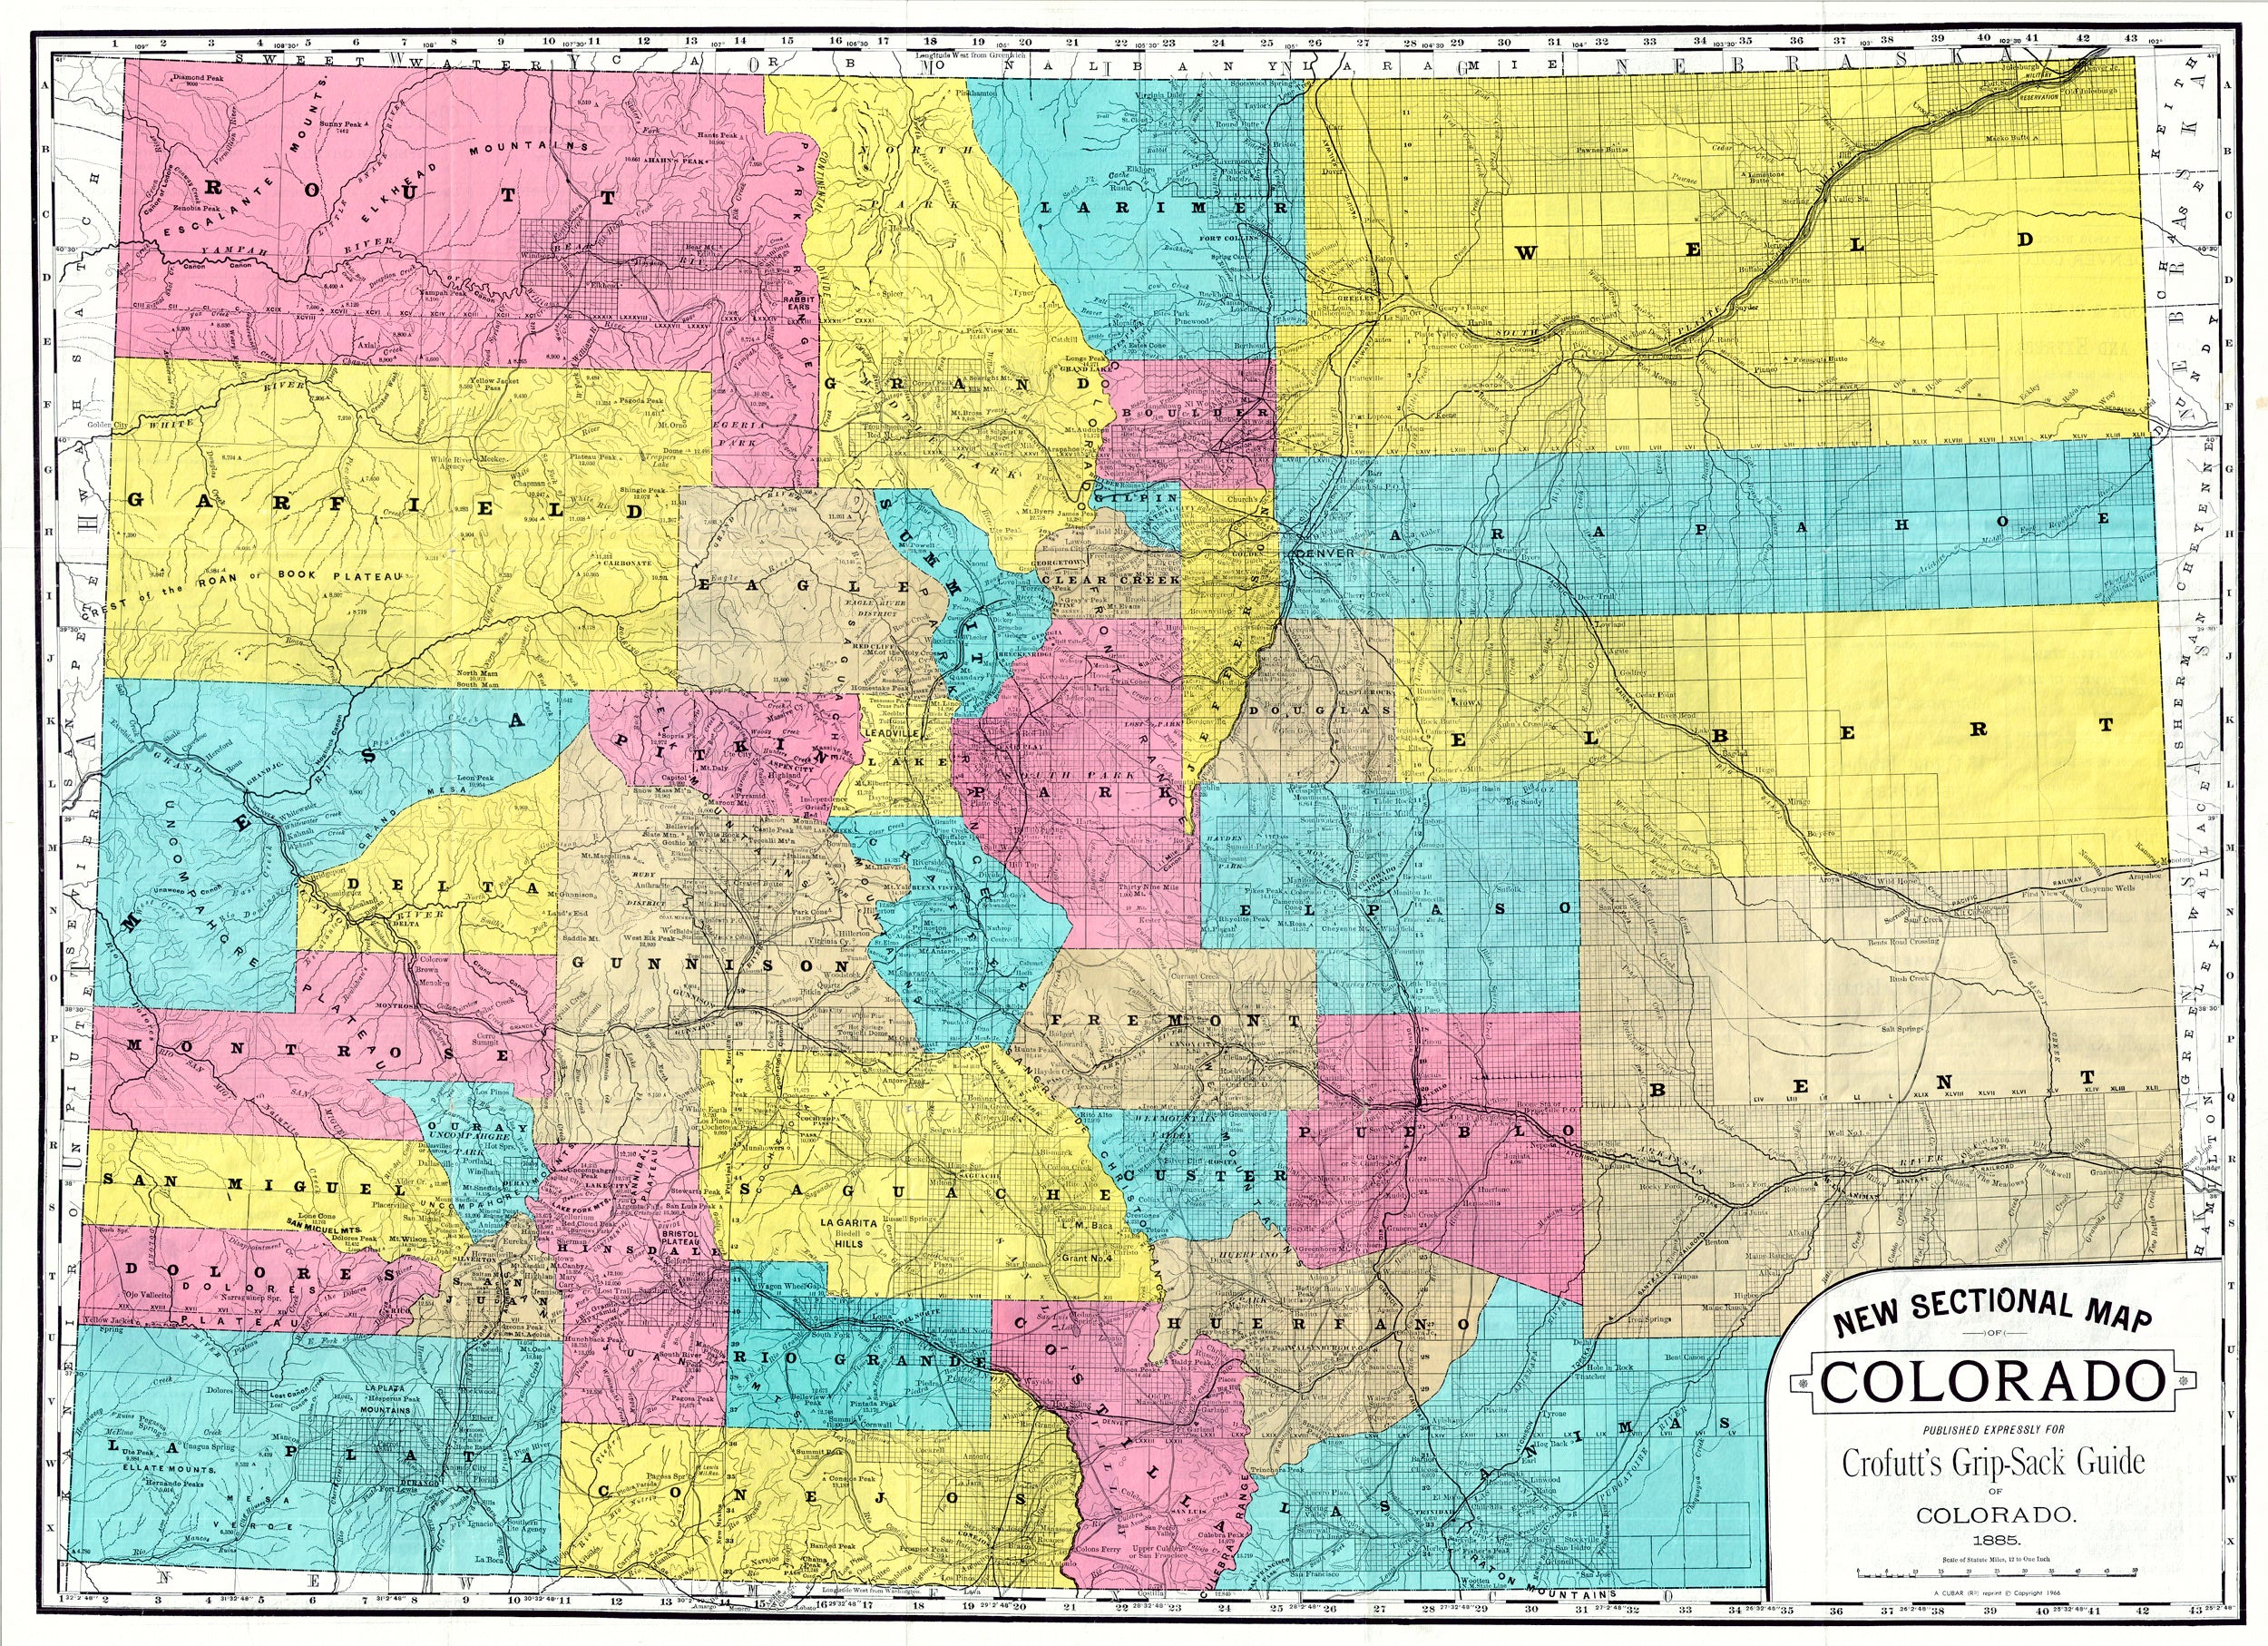 (CO.) New Sectional Map Of Colorado...